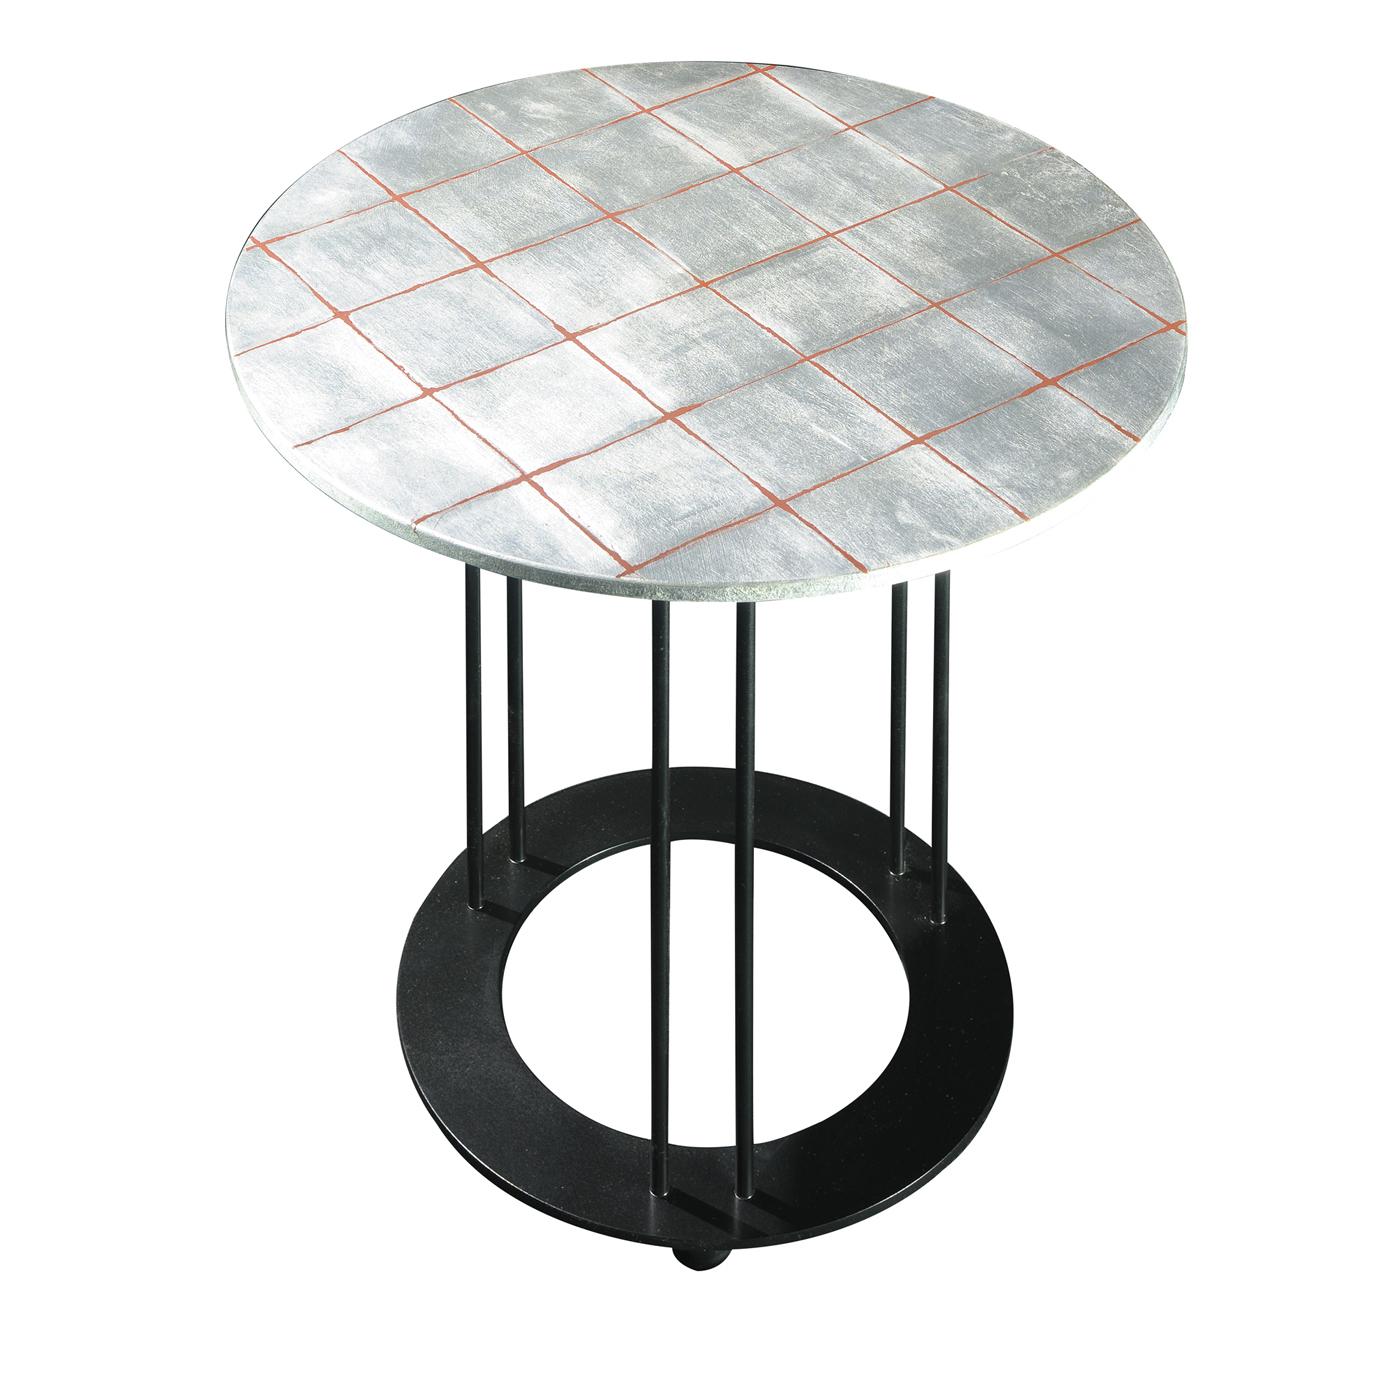 This coffee table is a unique piece of sophisticated allure exquisitely crafted with a clean, essential silhouette marked by simple geometric lines. The black coated metal structure is composed of three elongated, slim legs mounted on a base with